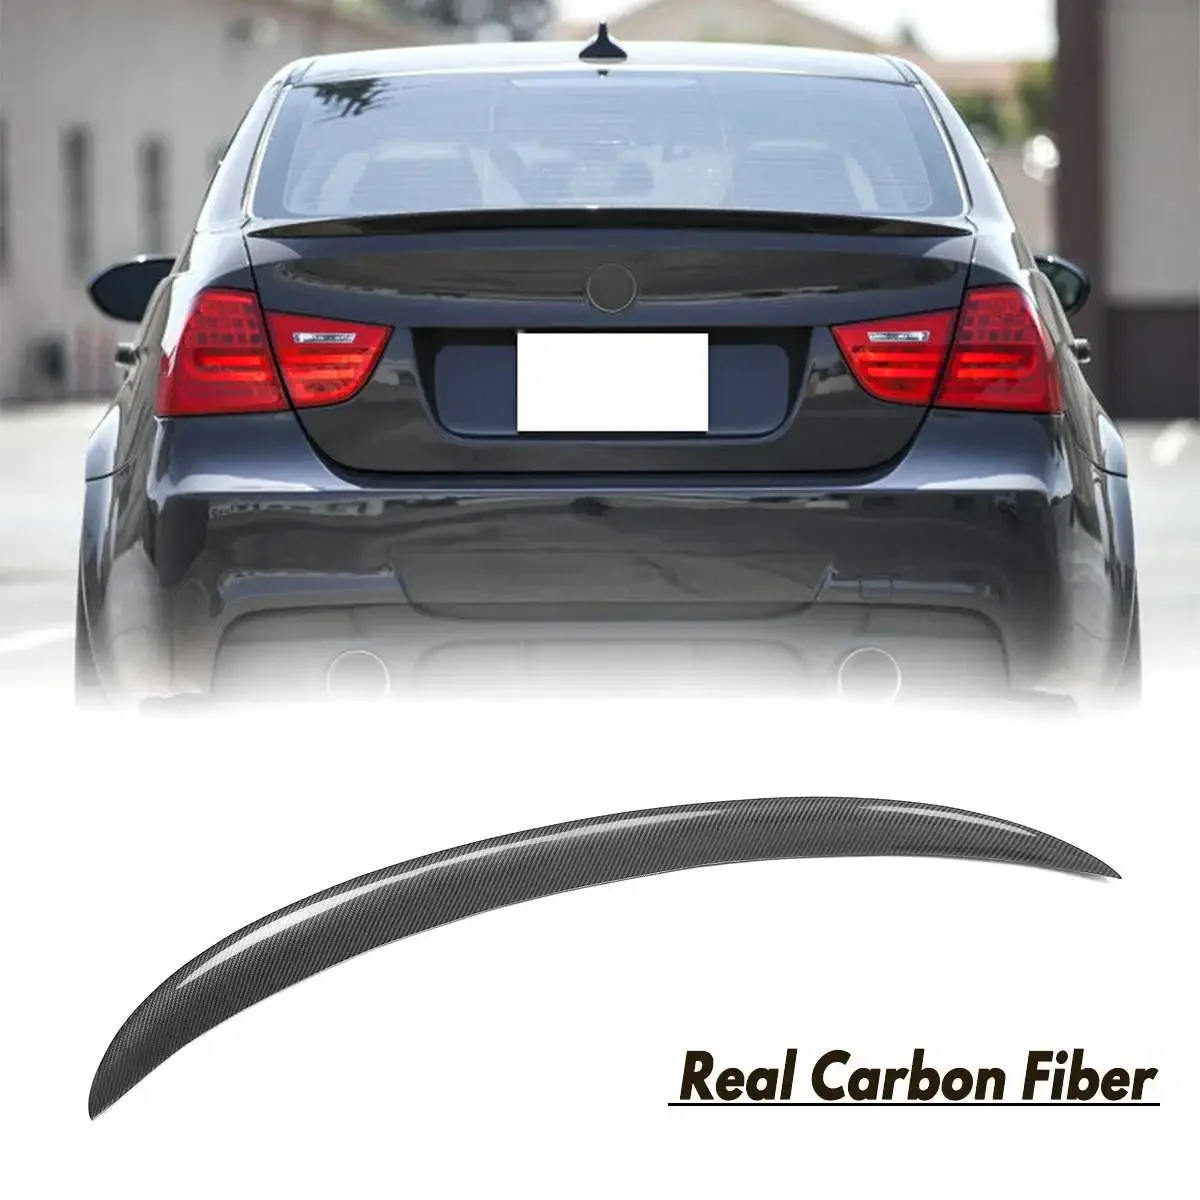 

Real Carbon Fiber Glossy UV-Coating High Kick P/M4 Type Rear Trunk Spoiler Wing For BMW E90 2006-2011 M3 328i Car Accessories